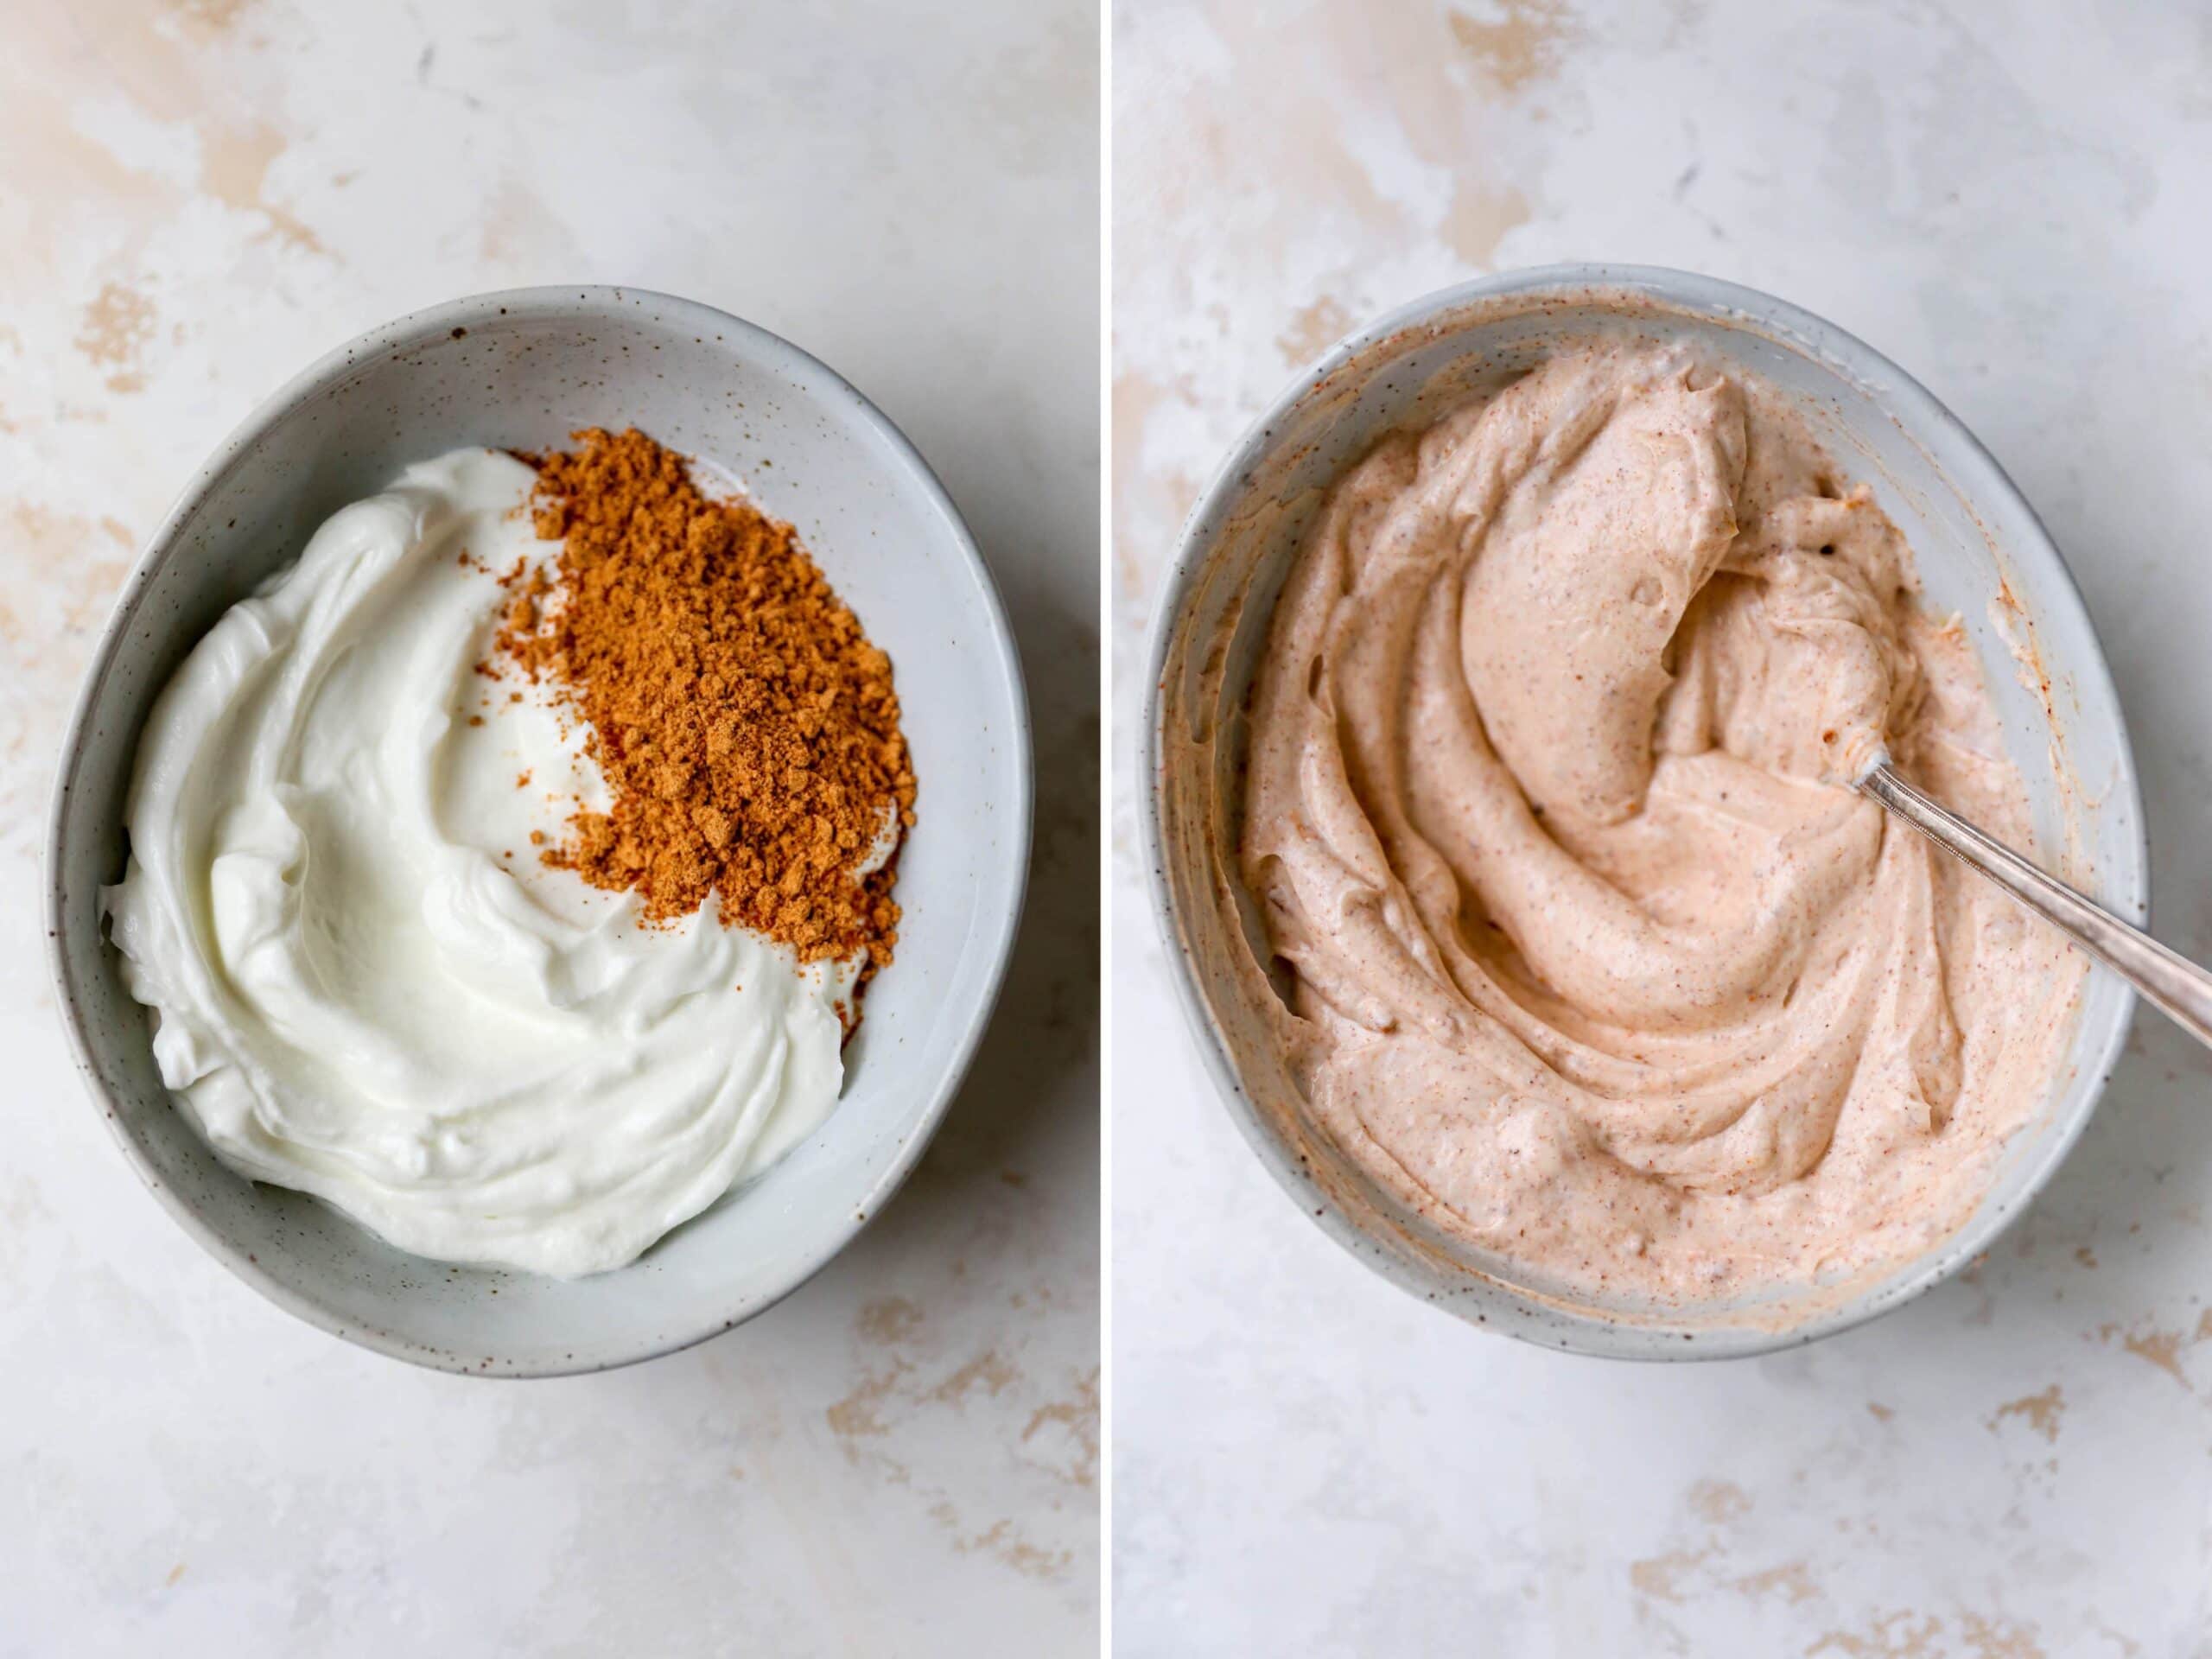 Side by side photos. First is a bowl of Greek yogurt with taco seasoning. Second photo is the yogurt mixed with the seasoning.